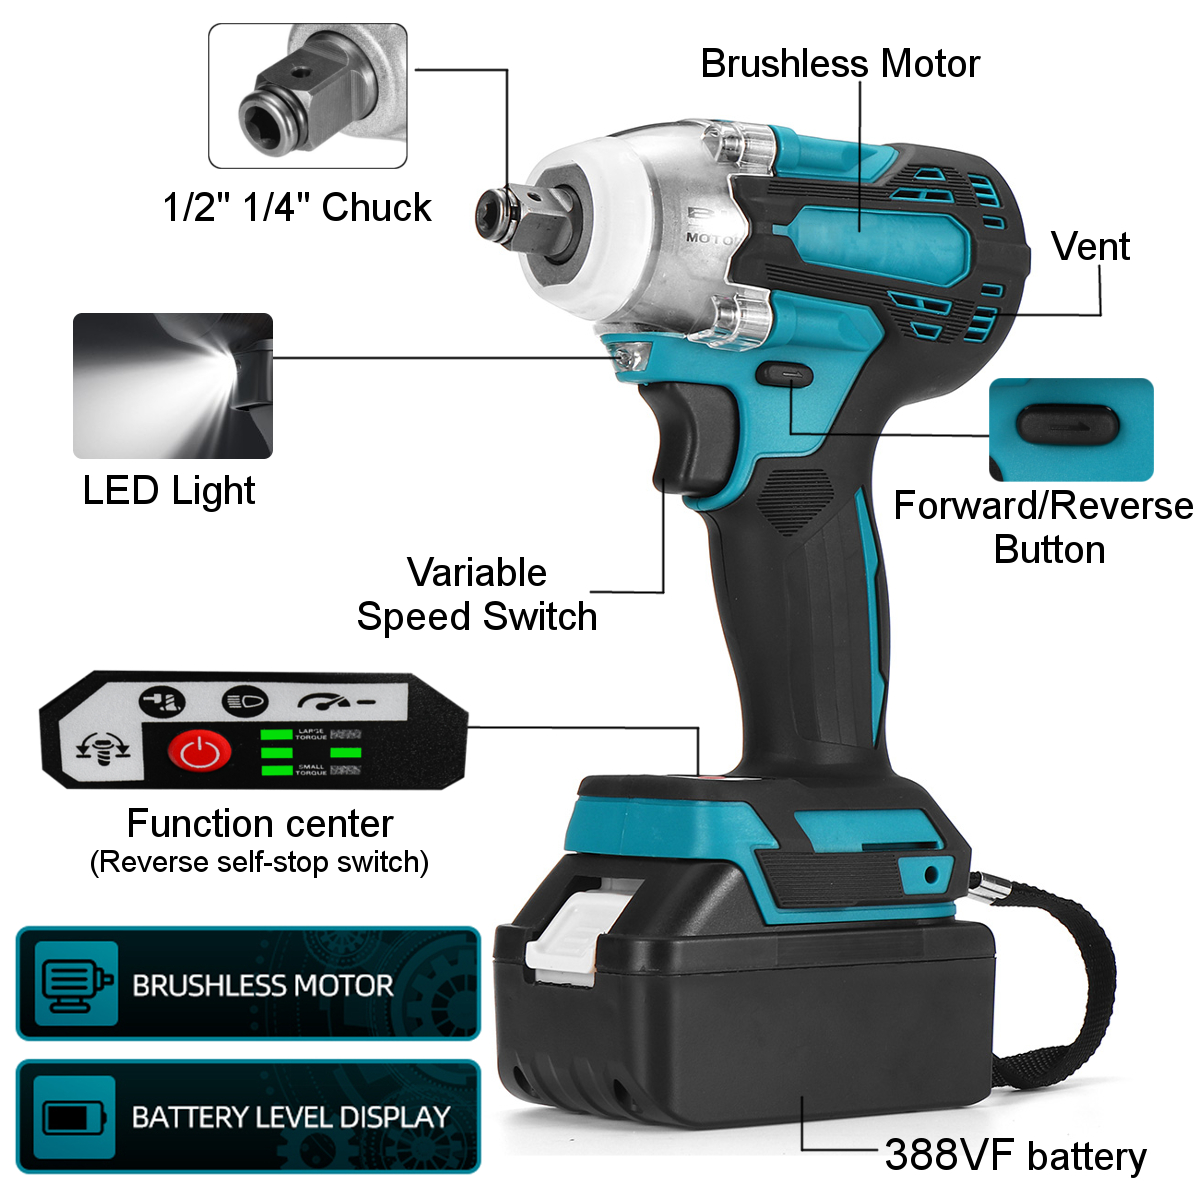 2-in1-18V-588Nm-Li-Ion-Brushless-Cordless-Electric-12quot-Wrench-14quot-Screwdriver-Drill-1790448-9